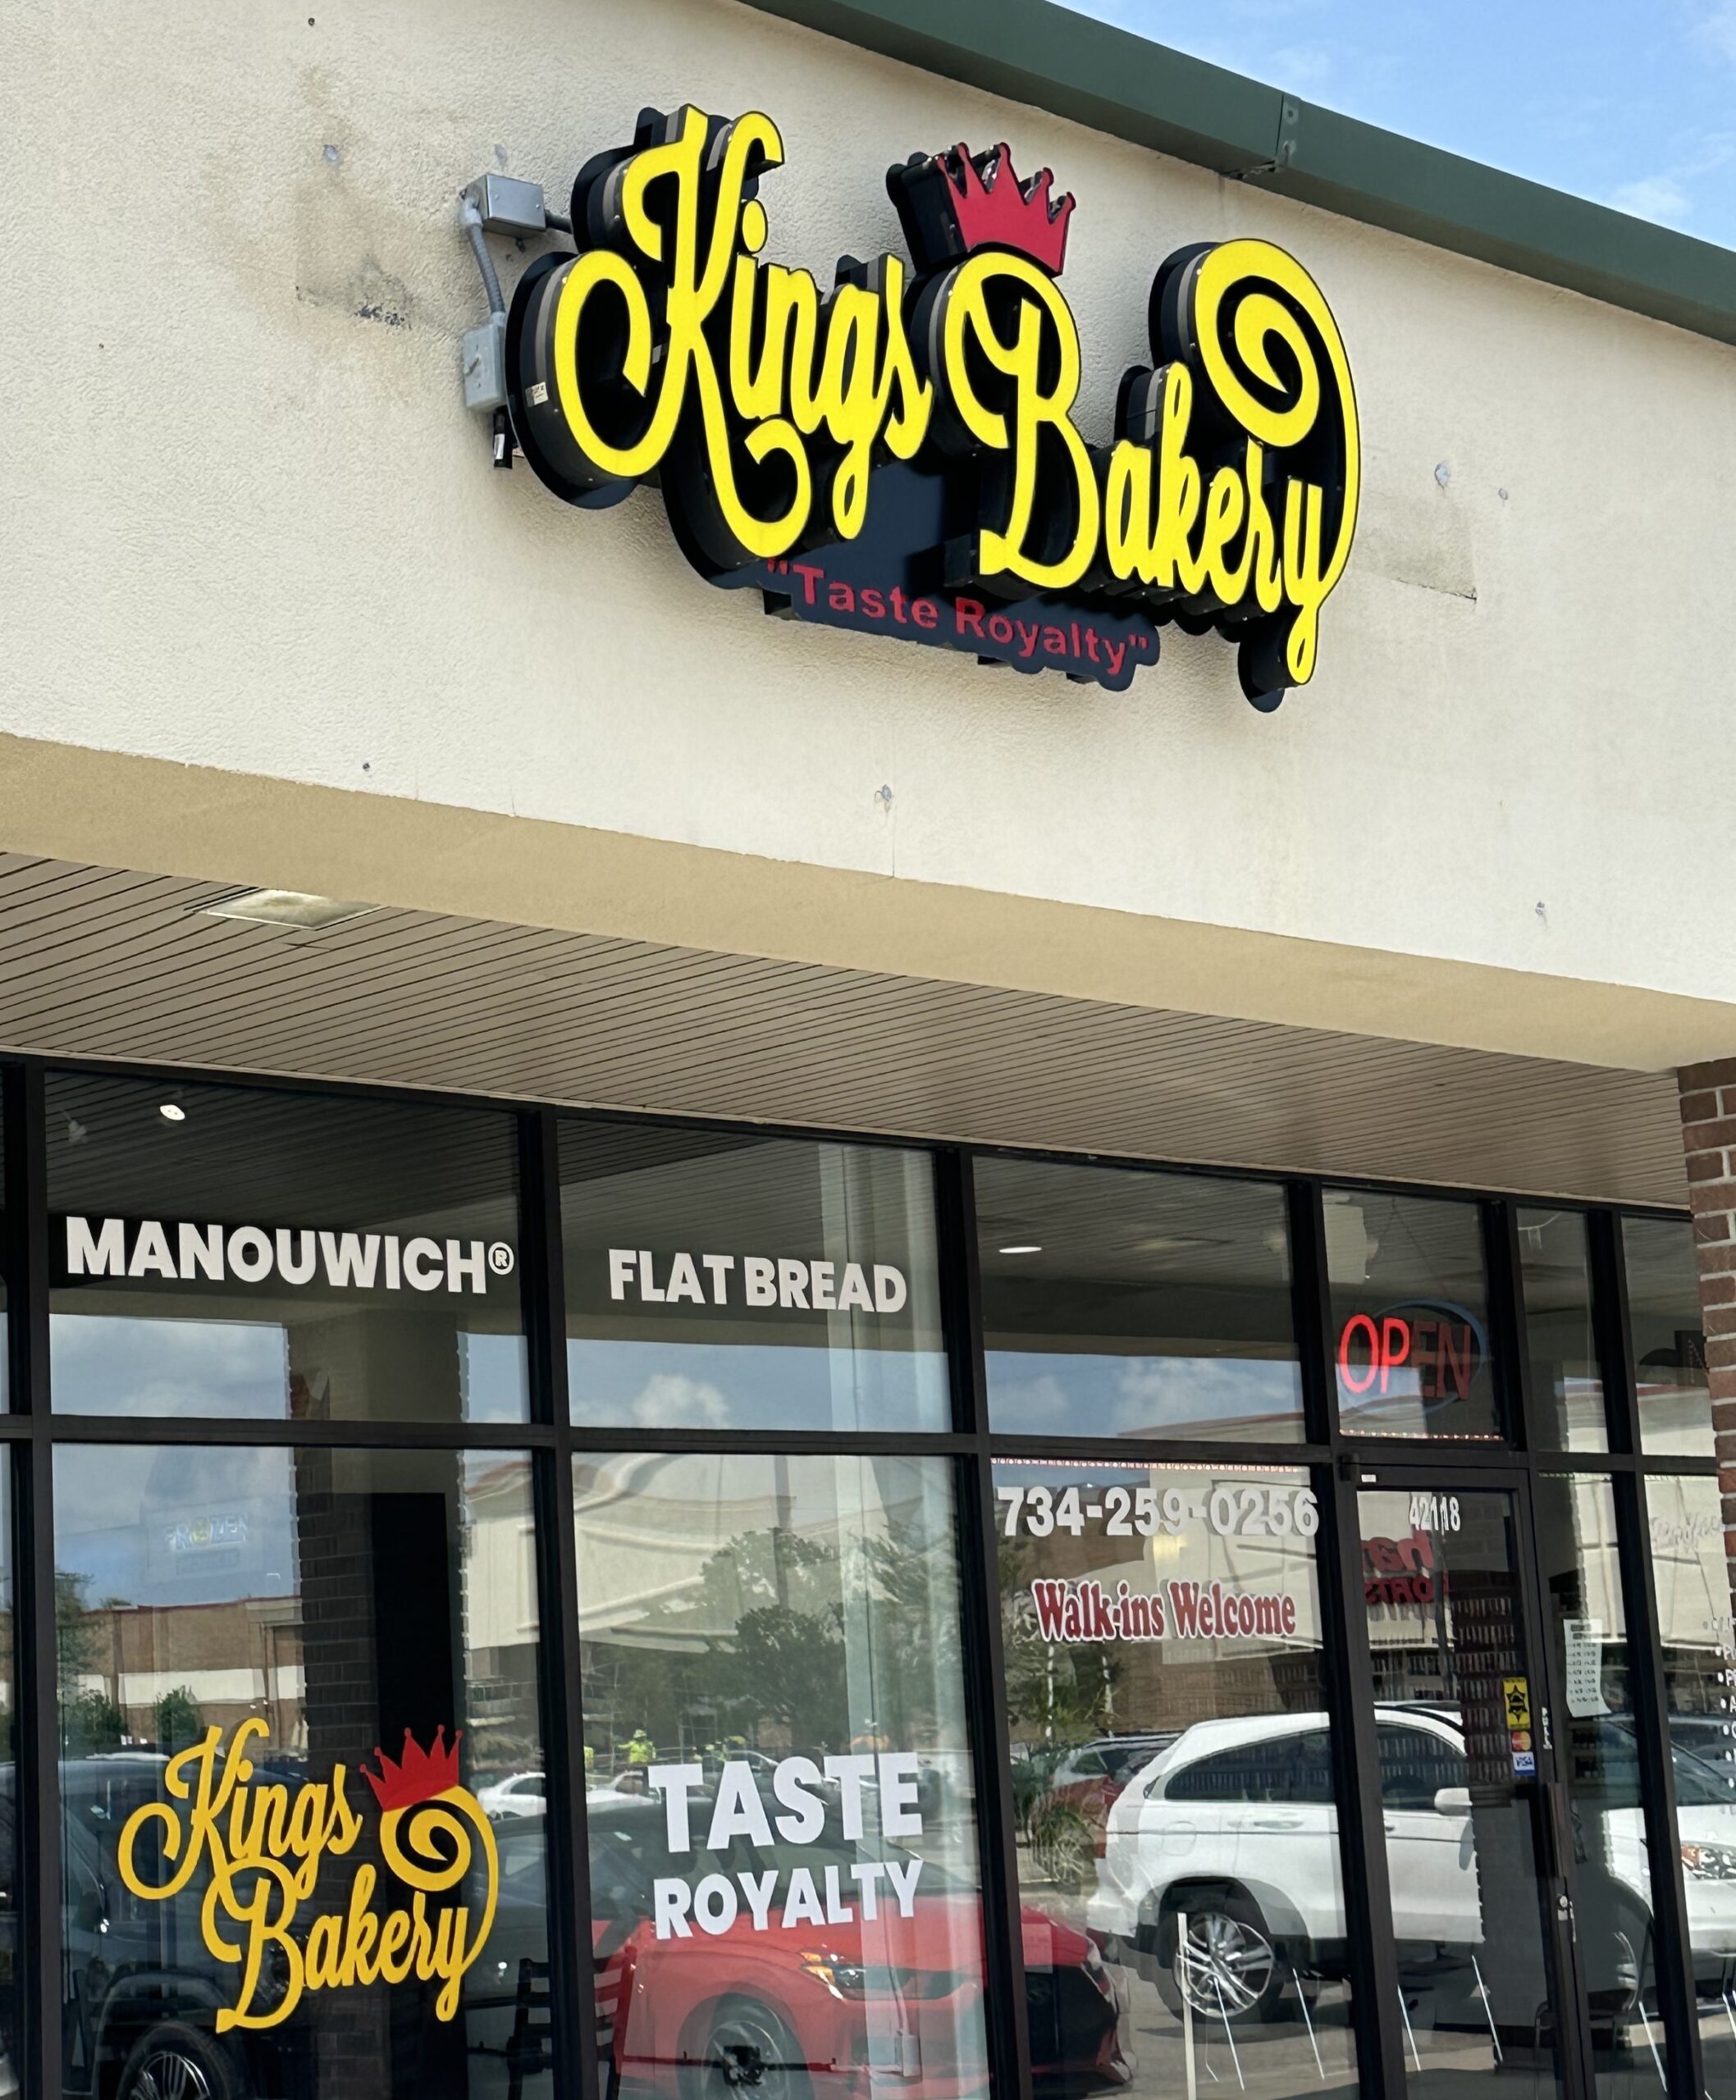 Kings Bakery is located at 42122 Ford Road just east of Lilley Road